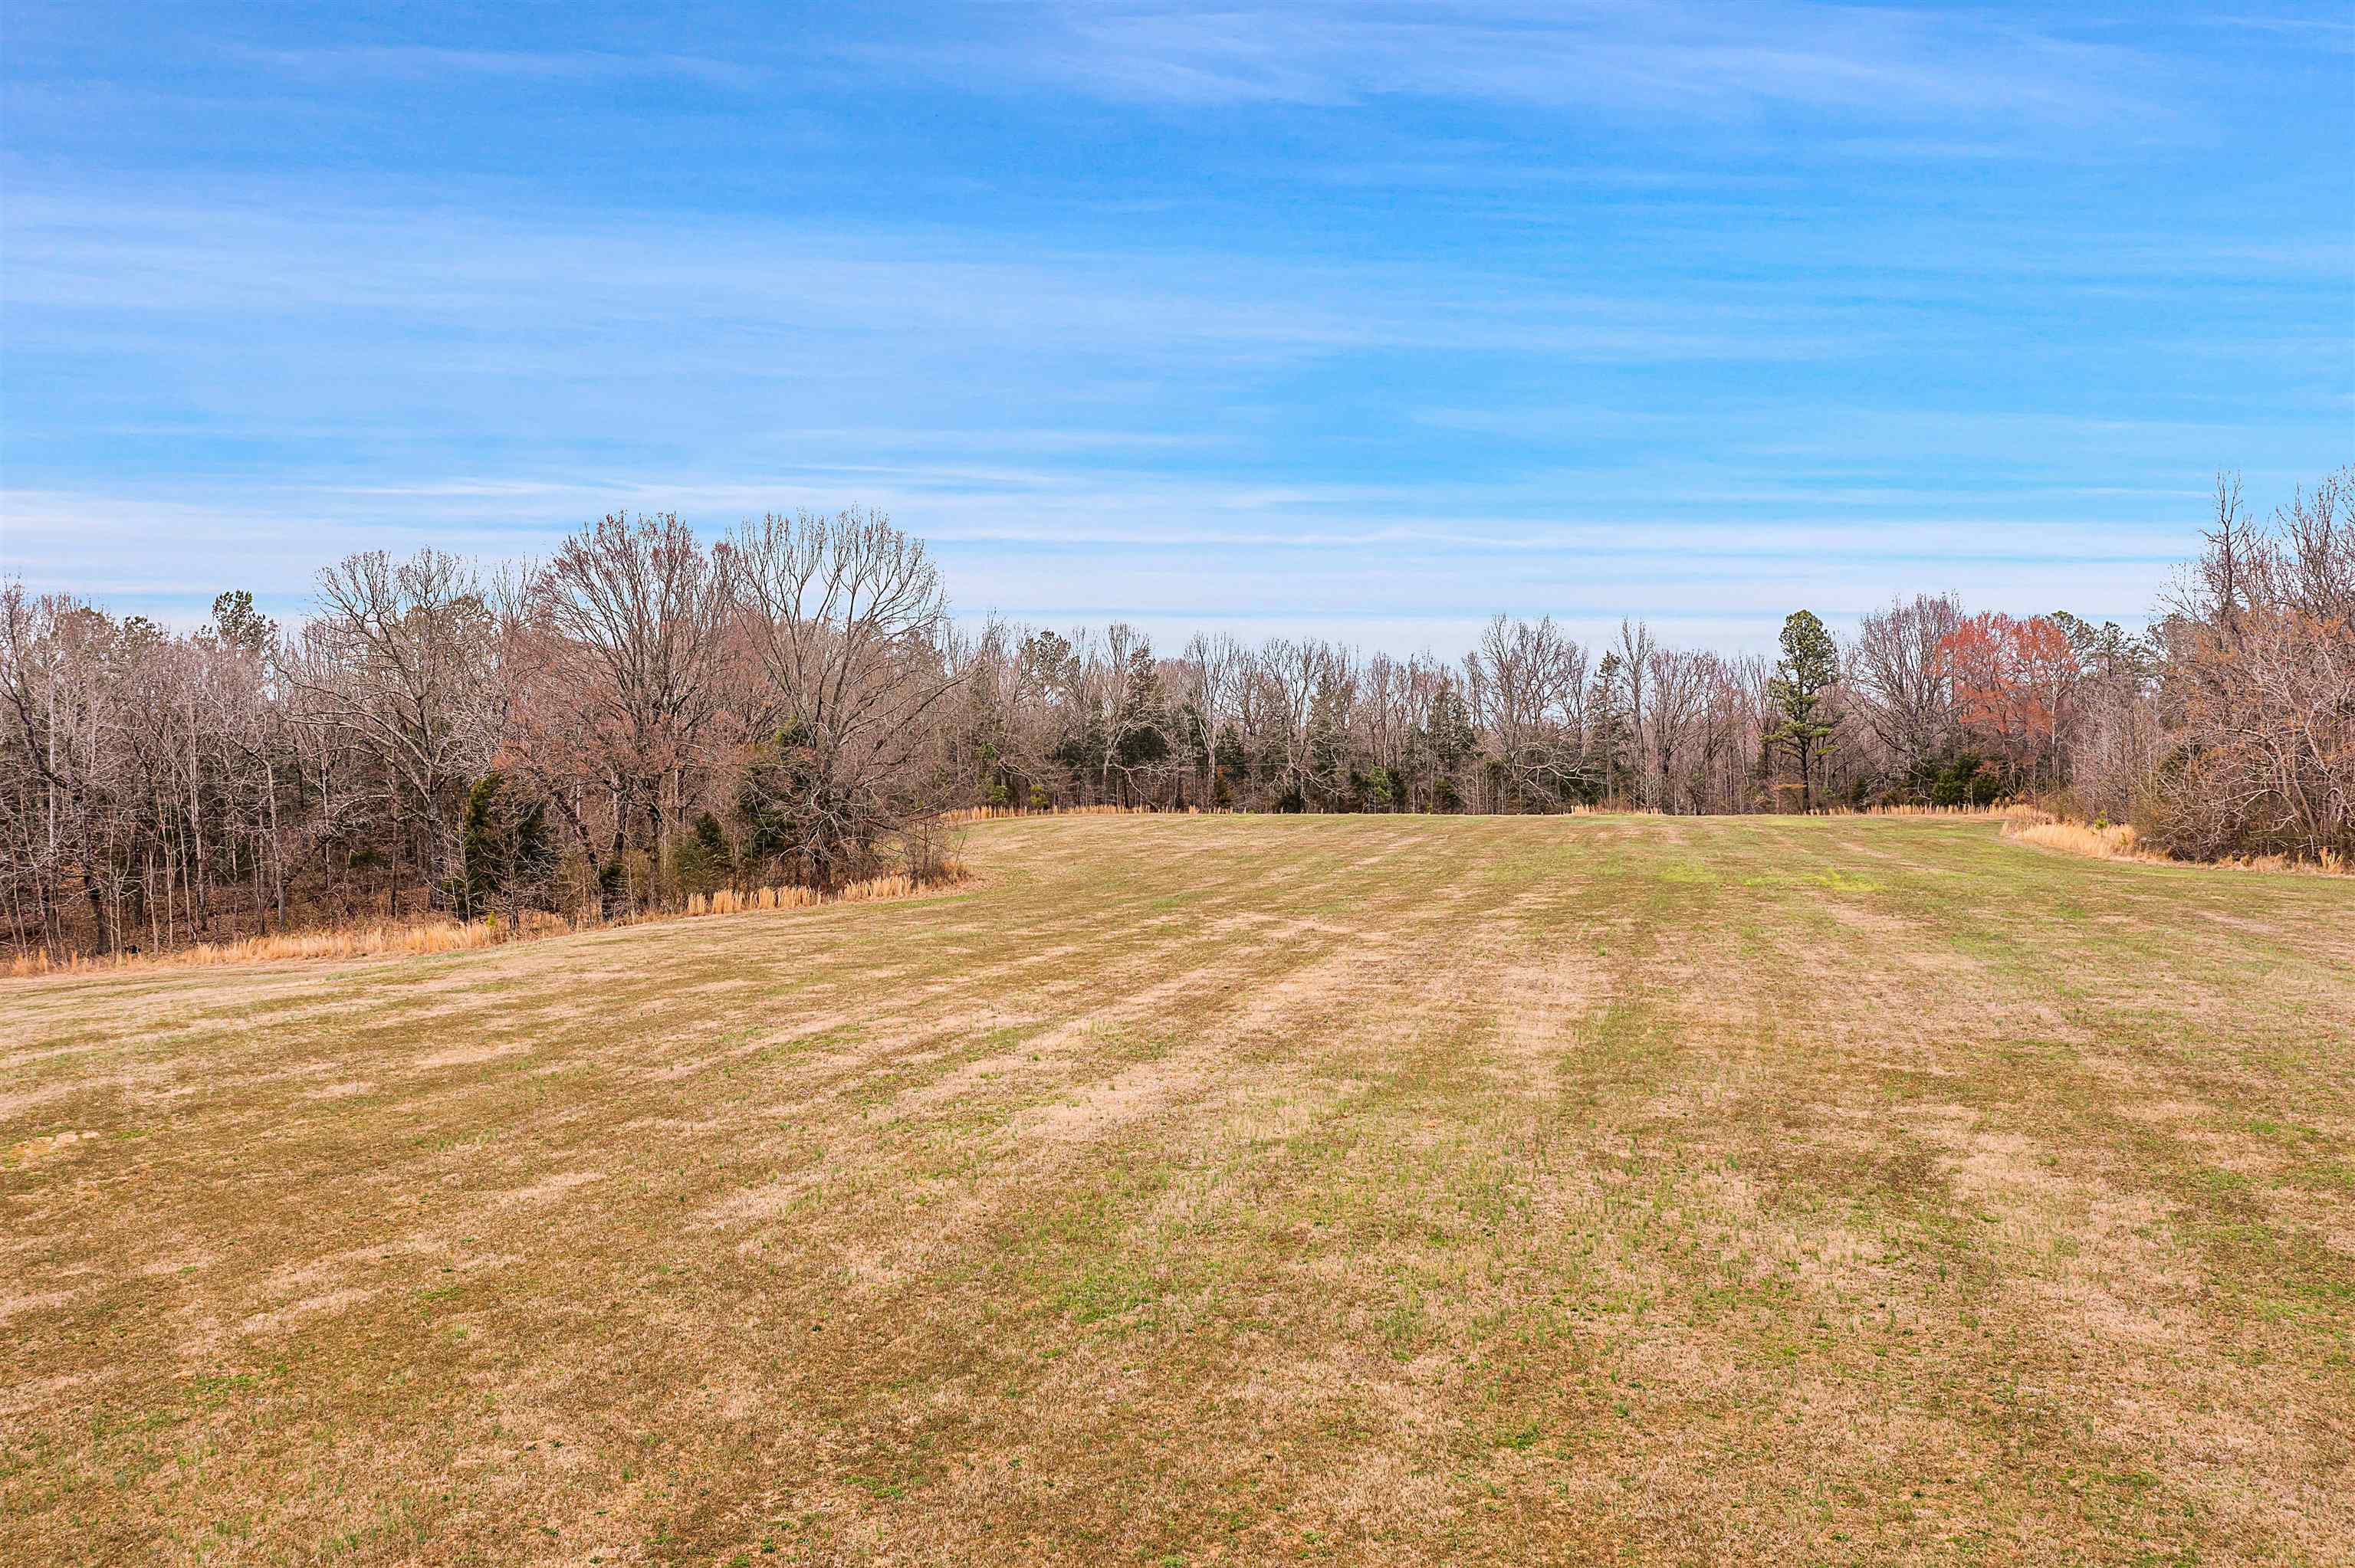 00 Water Tower Road, Cedar Grove, Tennessee 38321-6470, ,Lots/land,For Sale,00 Water Tower Road,240837